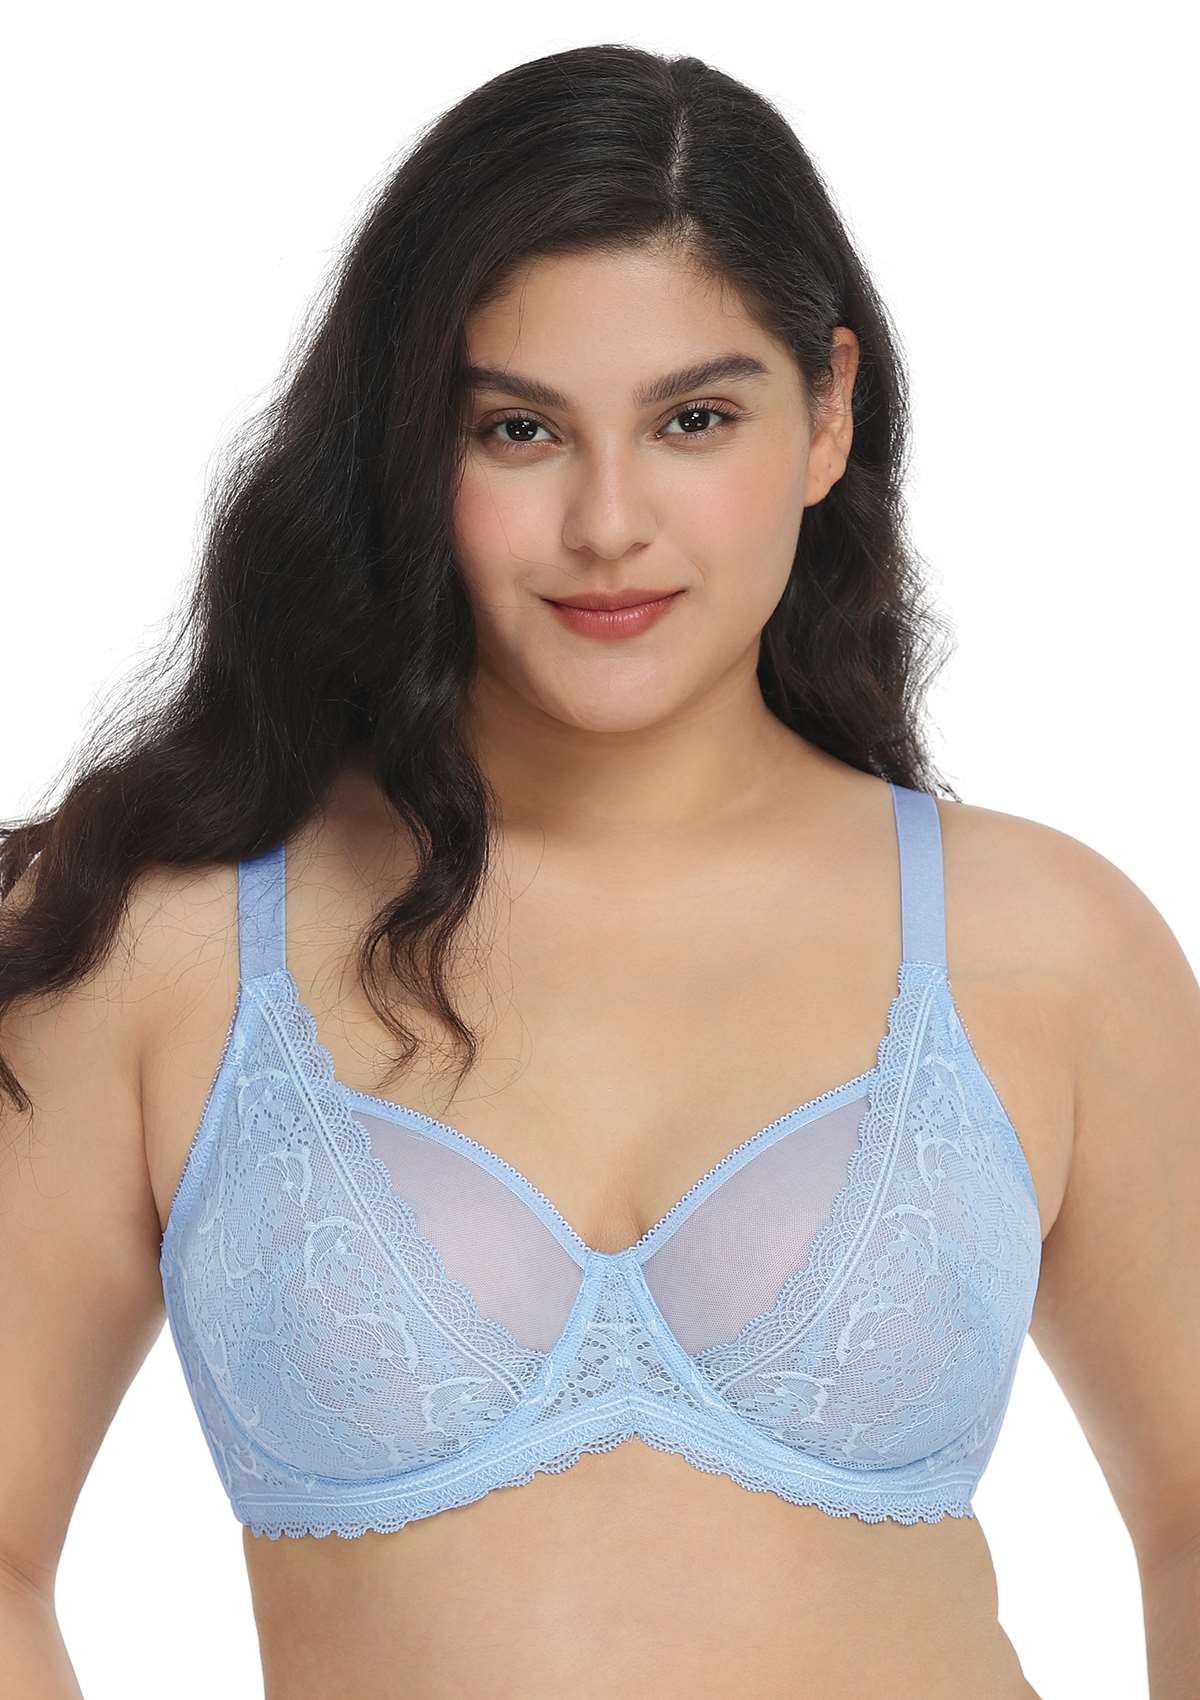 HSIA Anemone Big Bra: Best Bra For Lift And Support, Floral Bra - Light Blue / 42 / DD/E